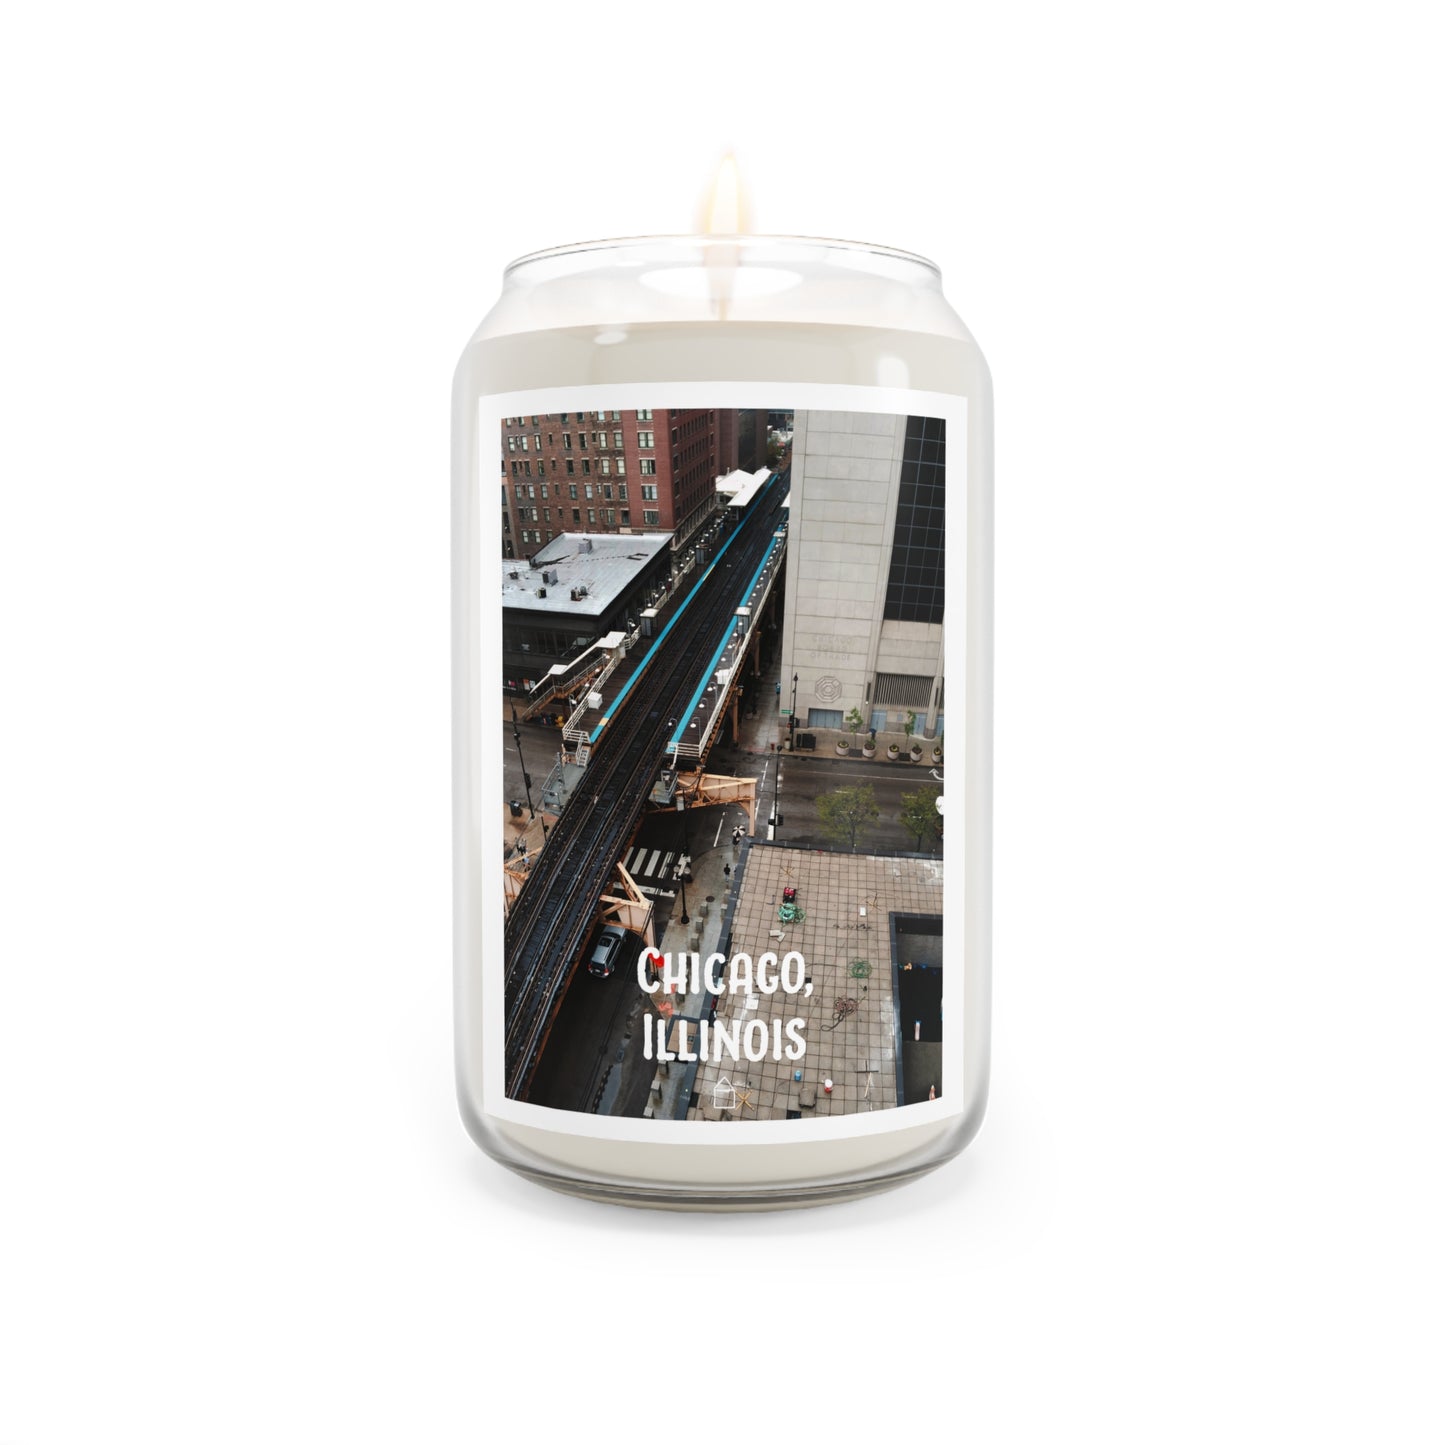 Chicago, Illinois (#001) - Home Town Candles, 13.75oz